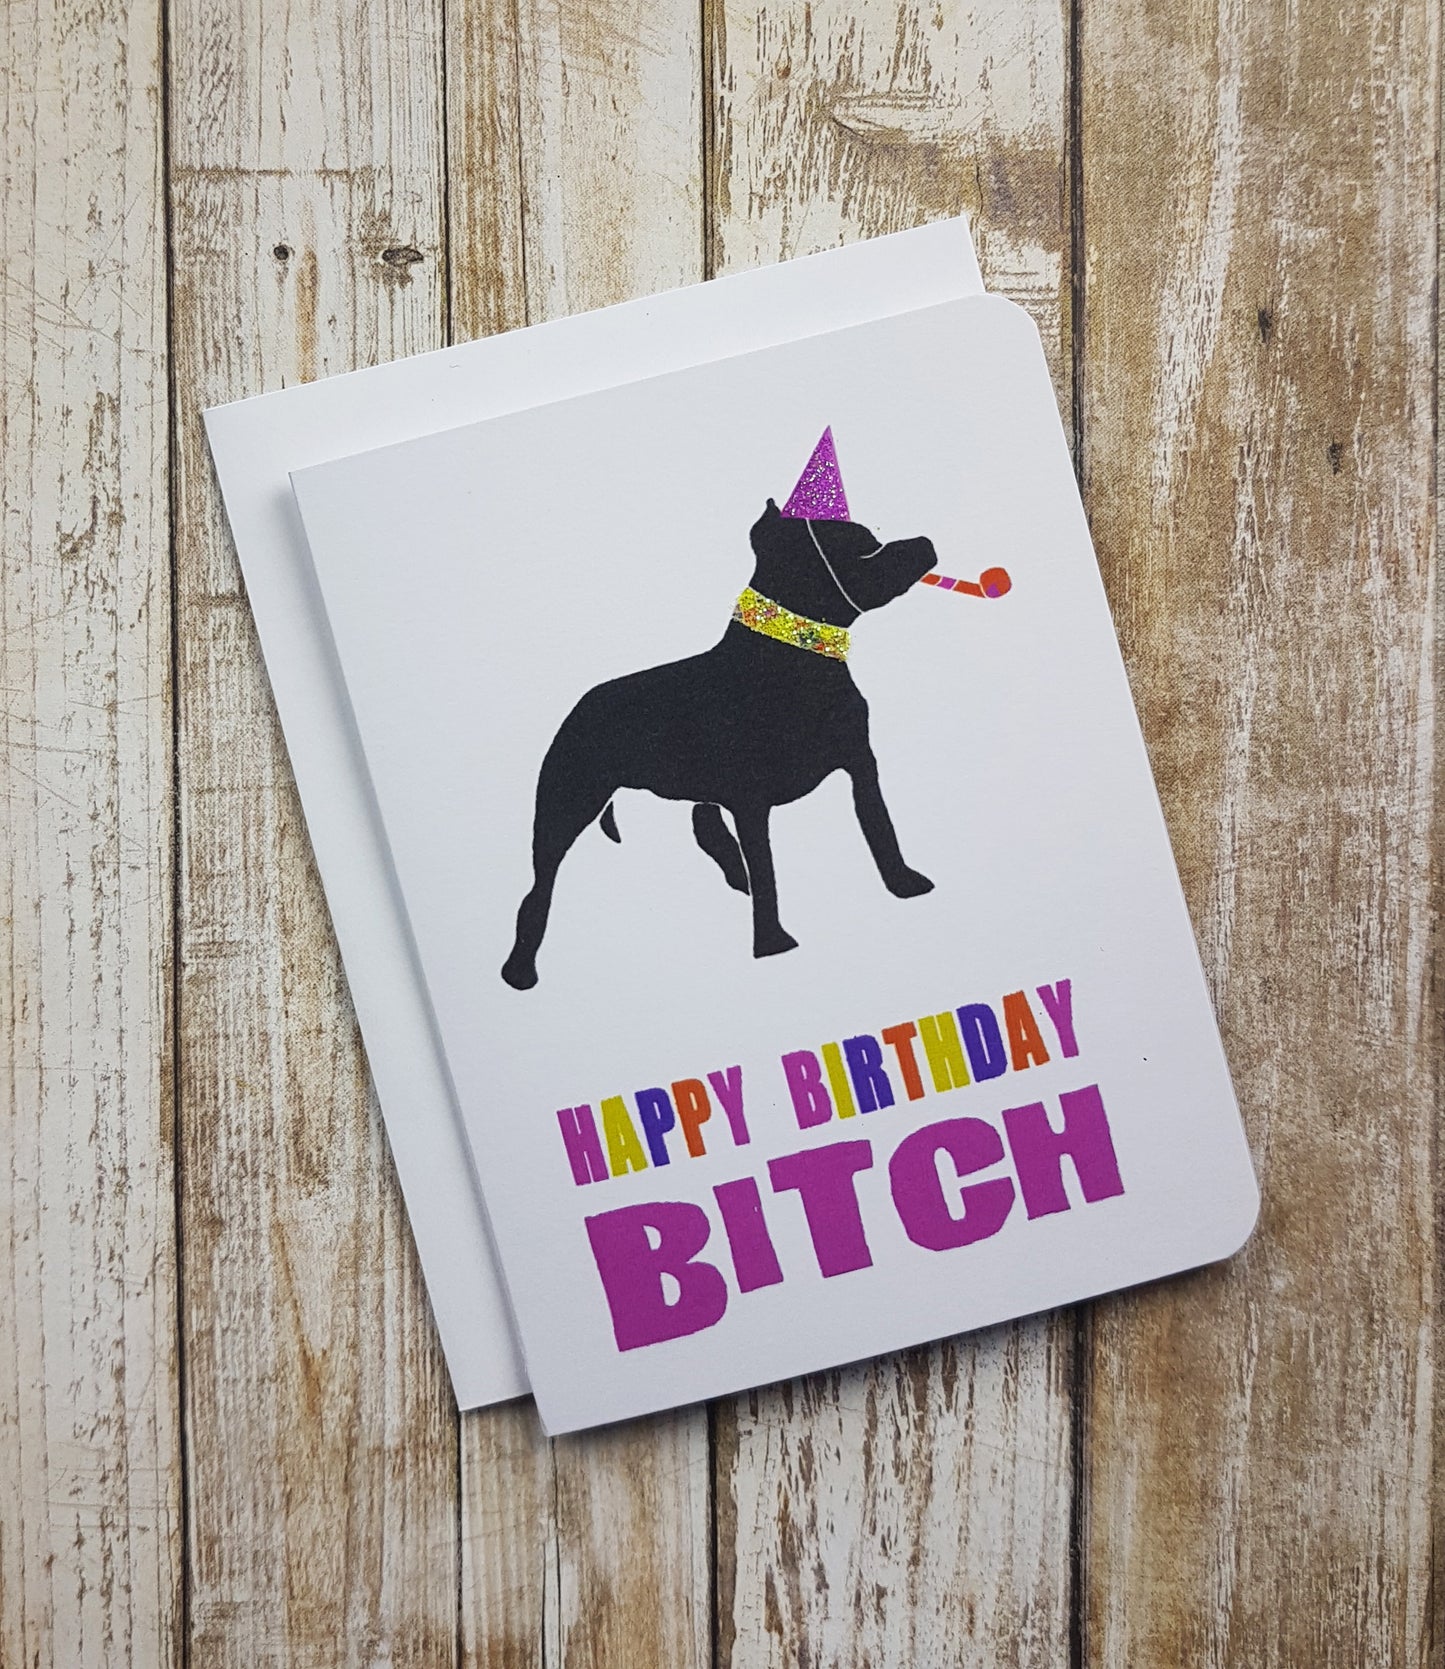 A photo of a white birthday card. It has a black dog silhouette on it. It's wearing a pink party hat, collar and has a streamer in its mouth. Text on card reads 'Happy Birthday Bitch.'